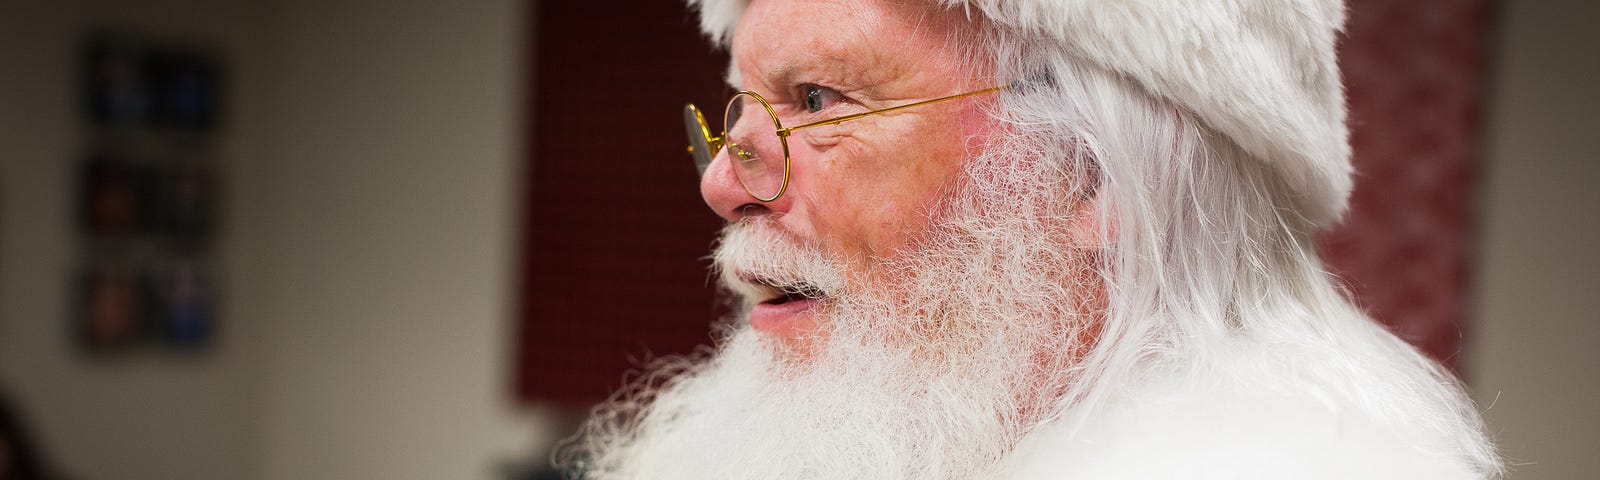 image shows Santa with a surprised expression